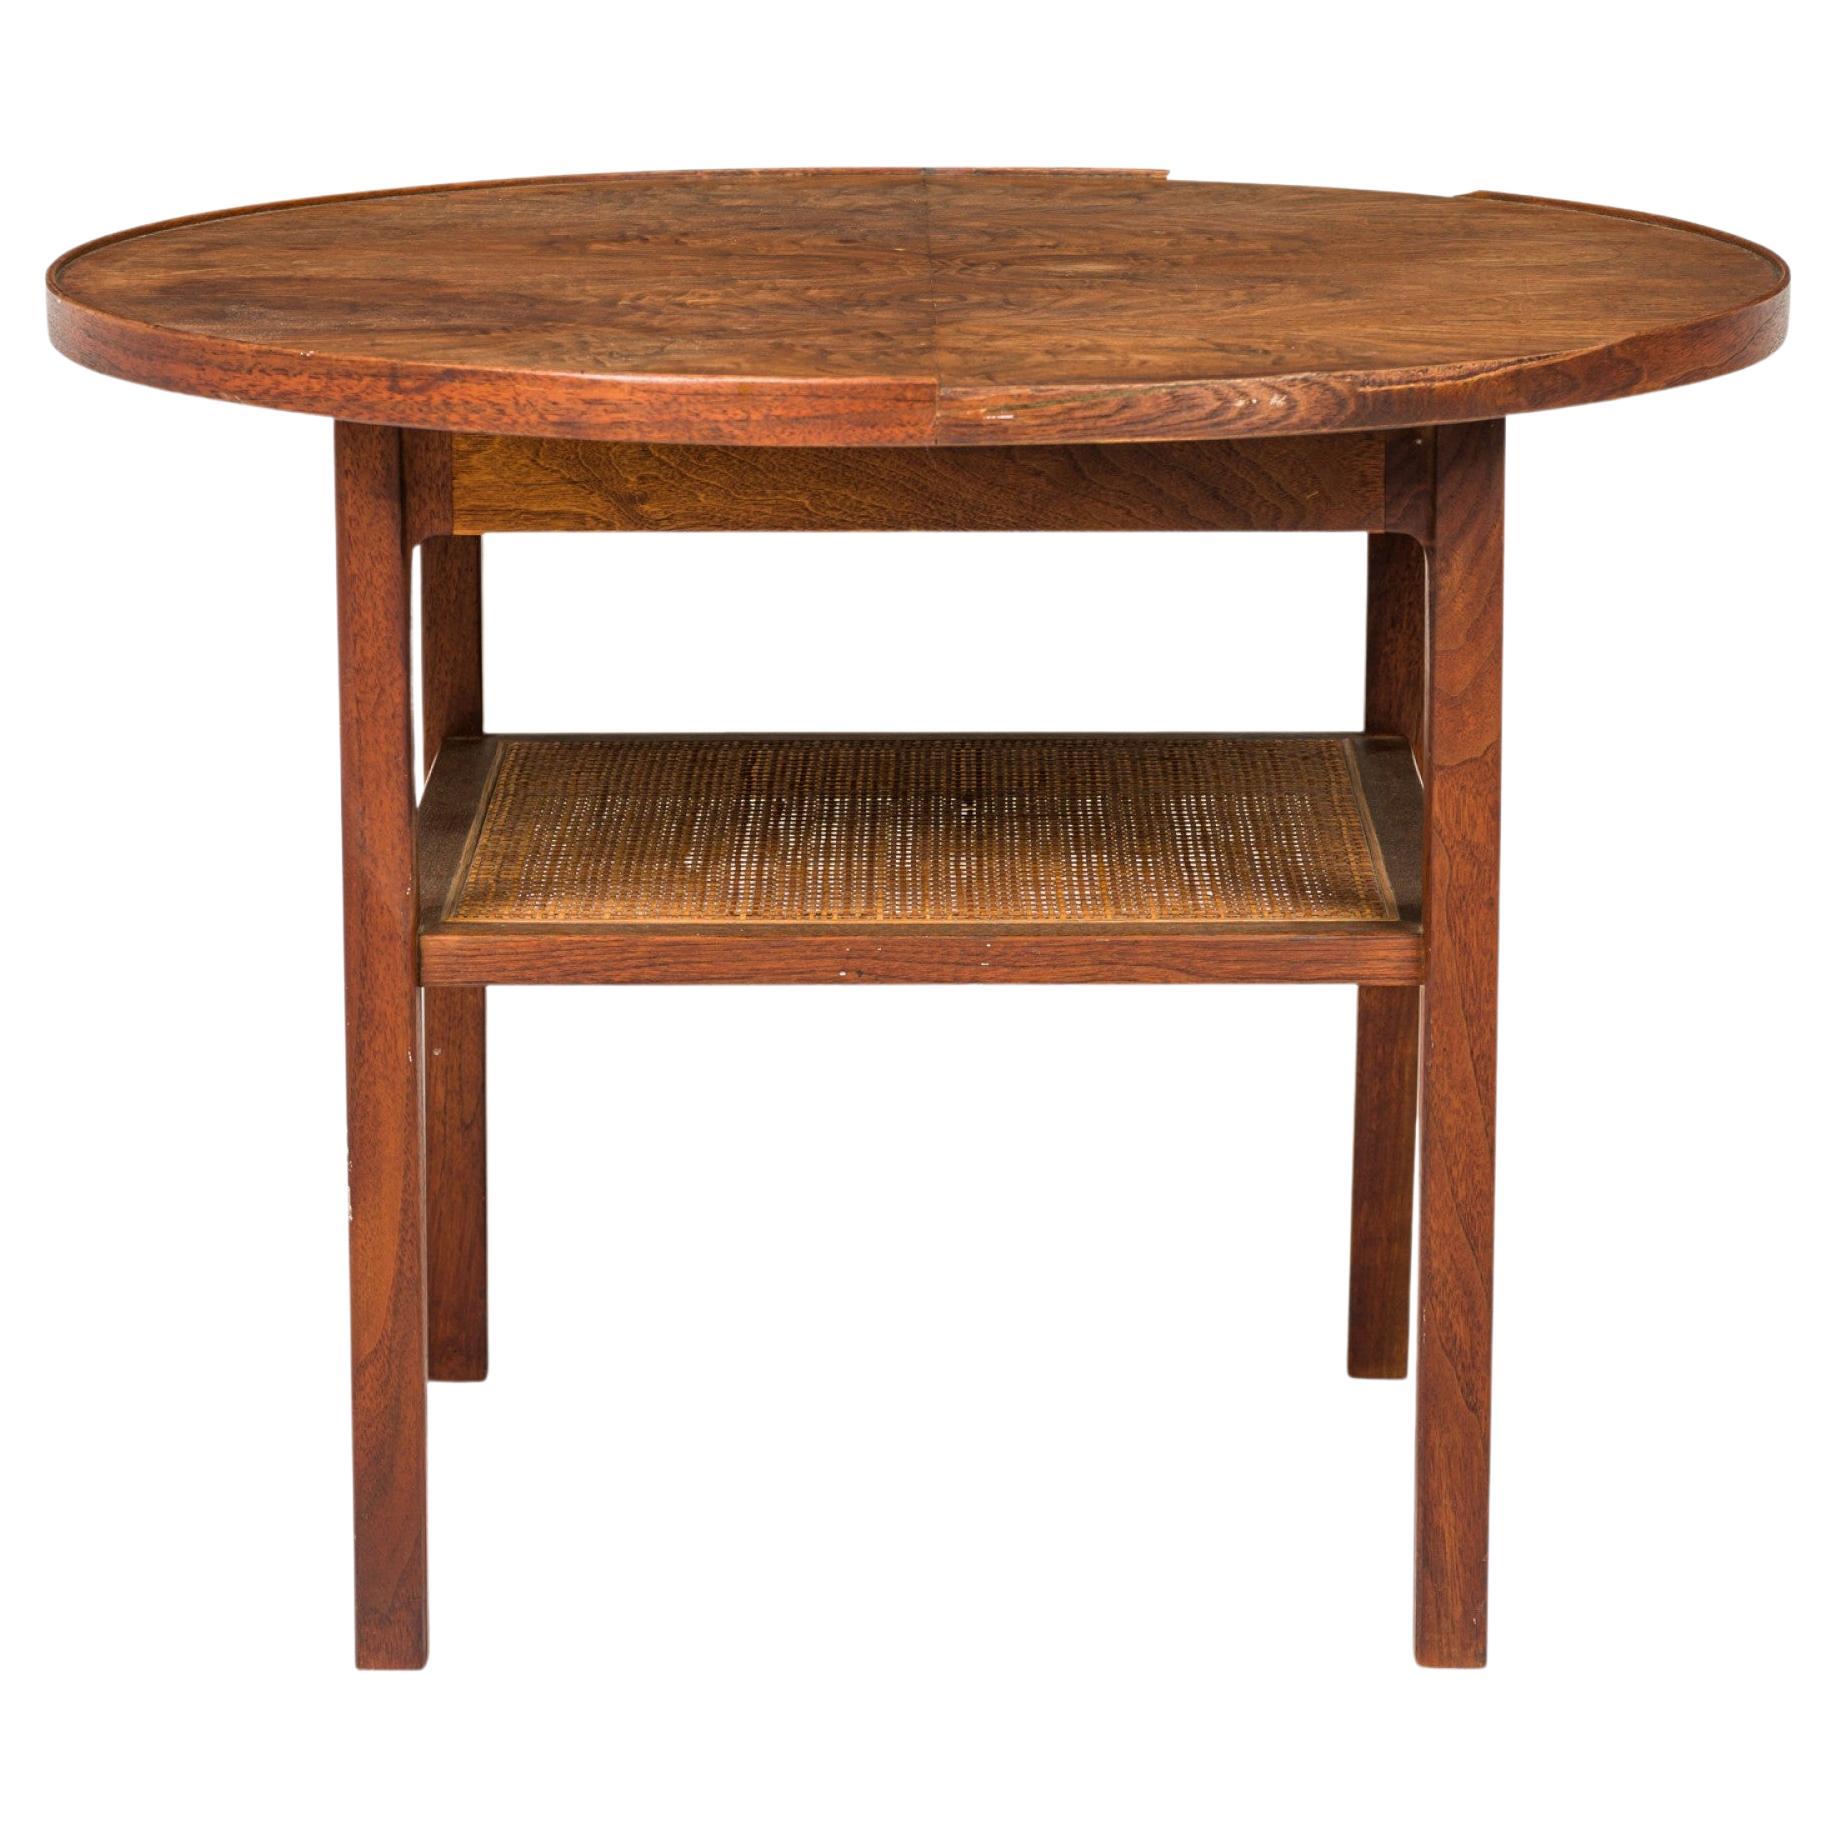 Paul McCobb for Calvin Furniture Co. Circular Walnut and Cane End / Side Table